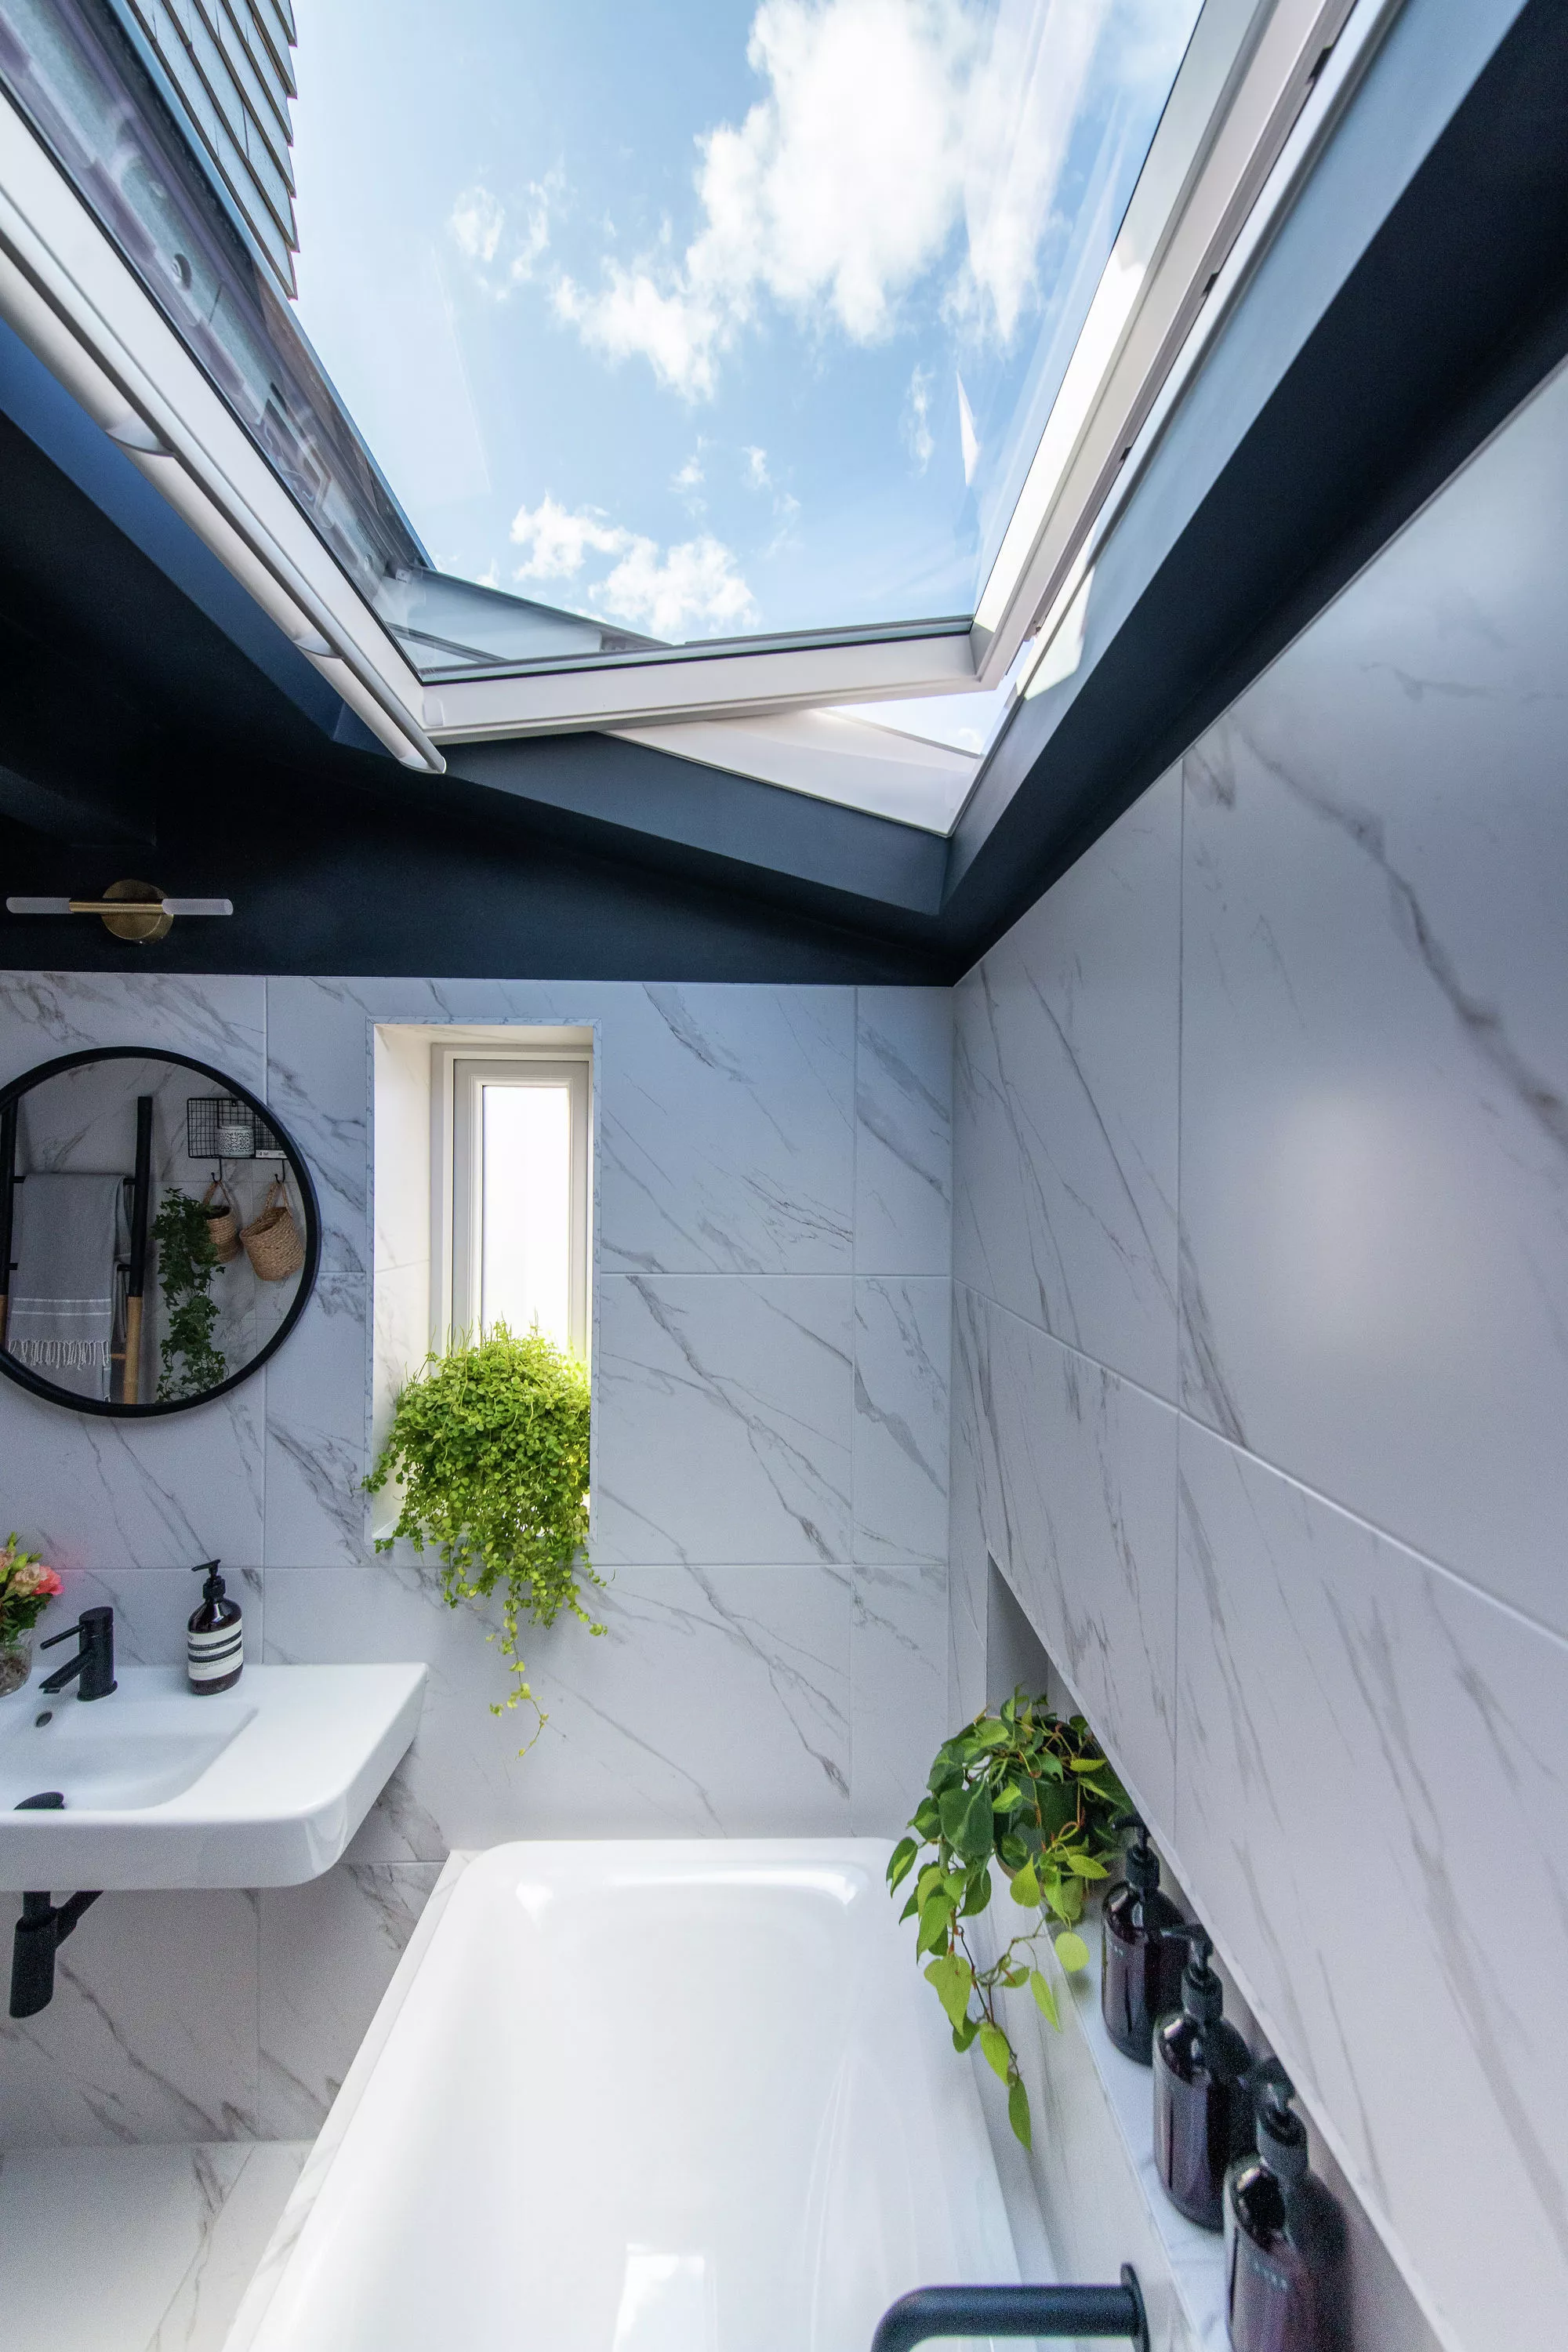 Luxurious marble bathroom with natural light from VELUX roof window.